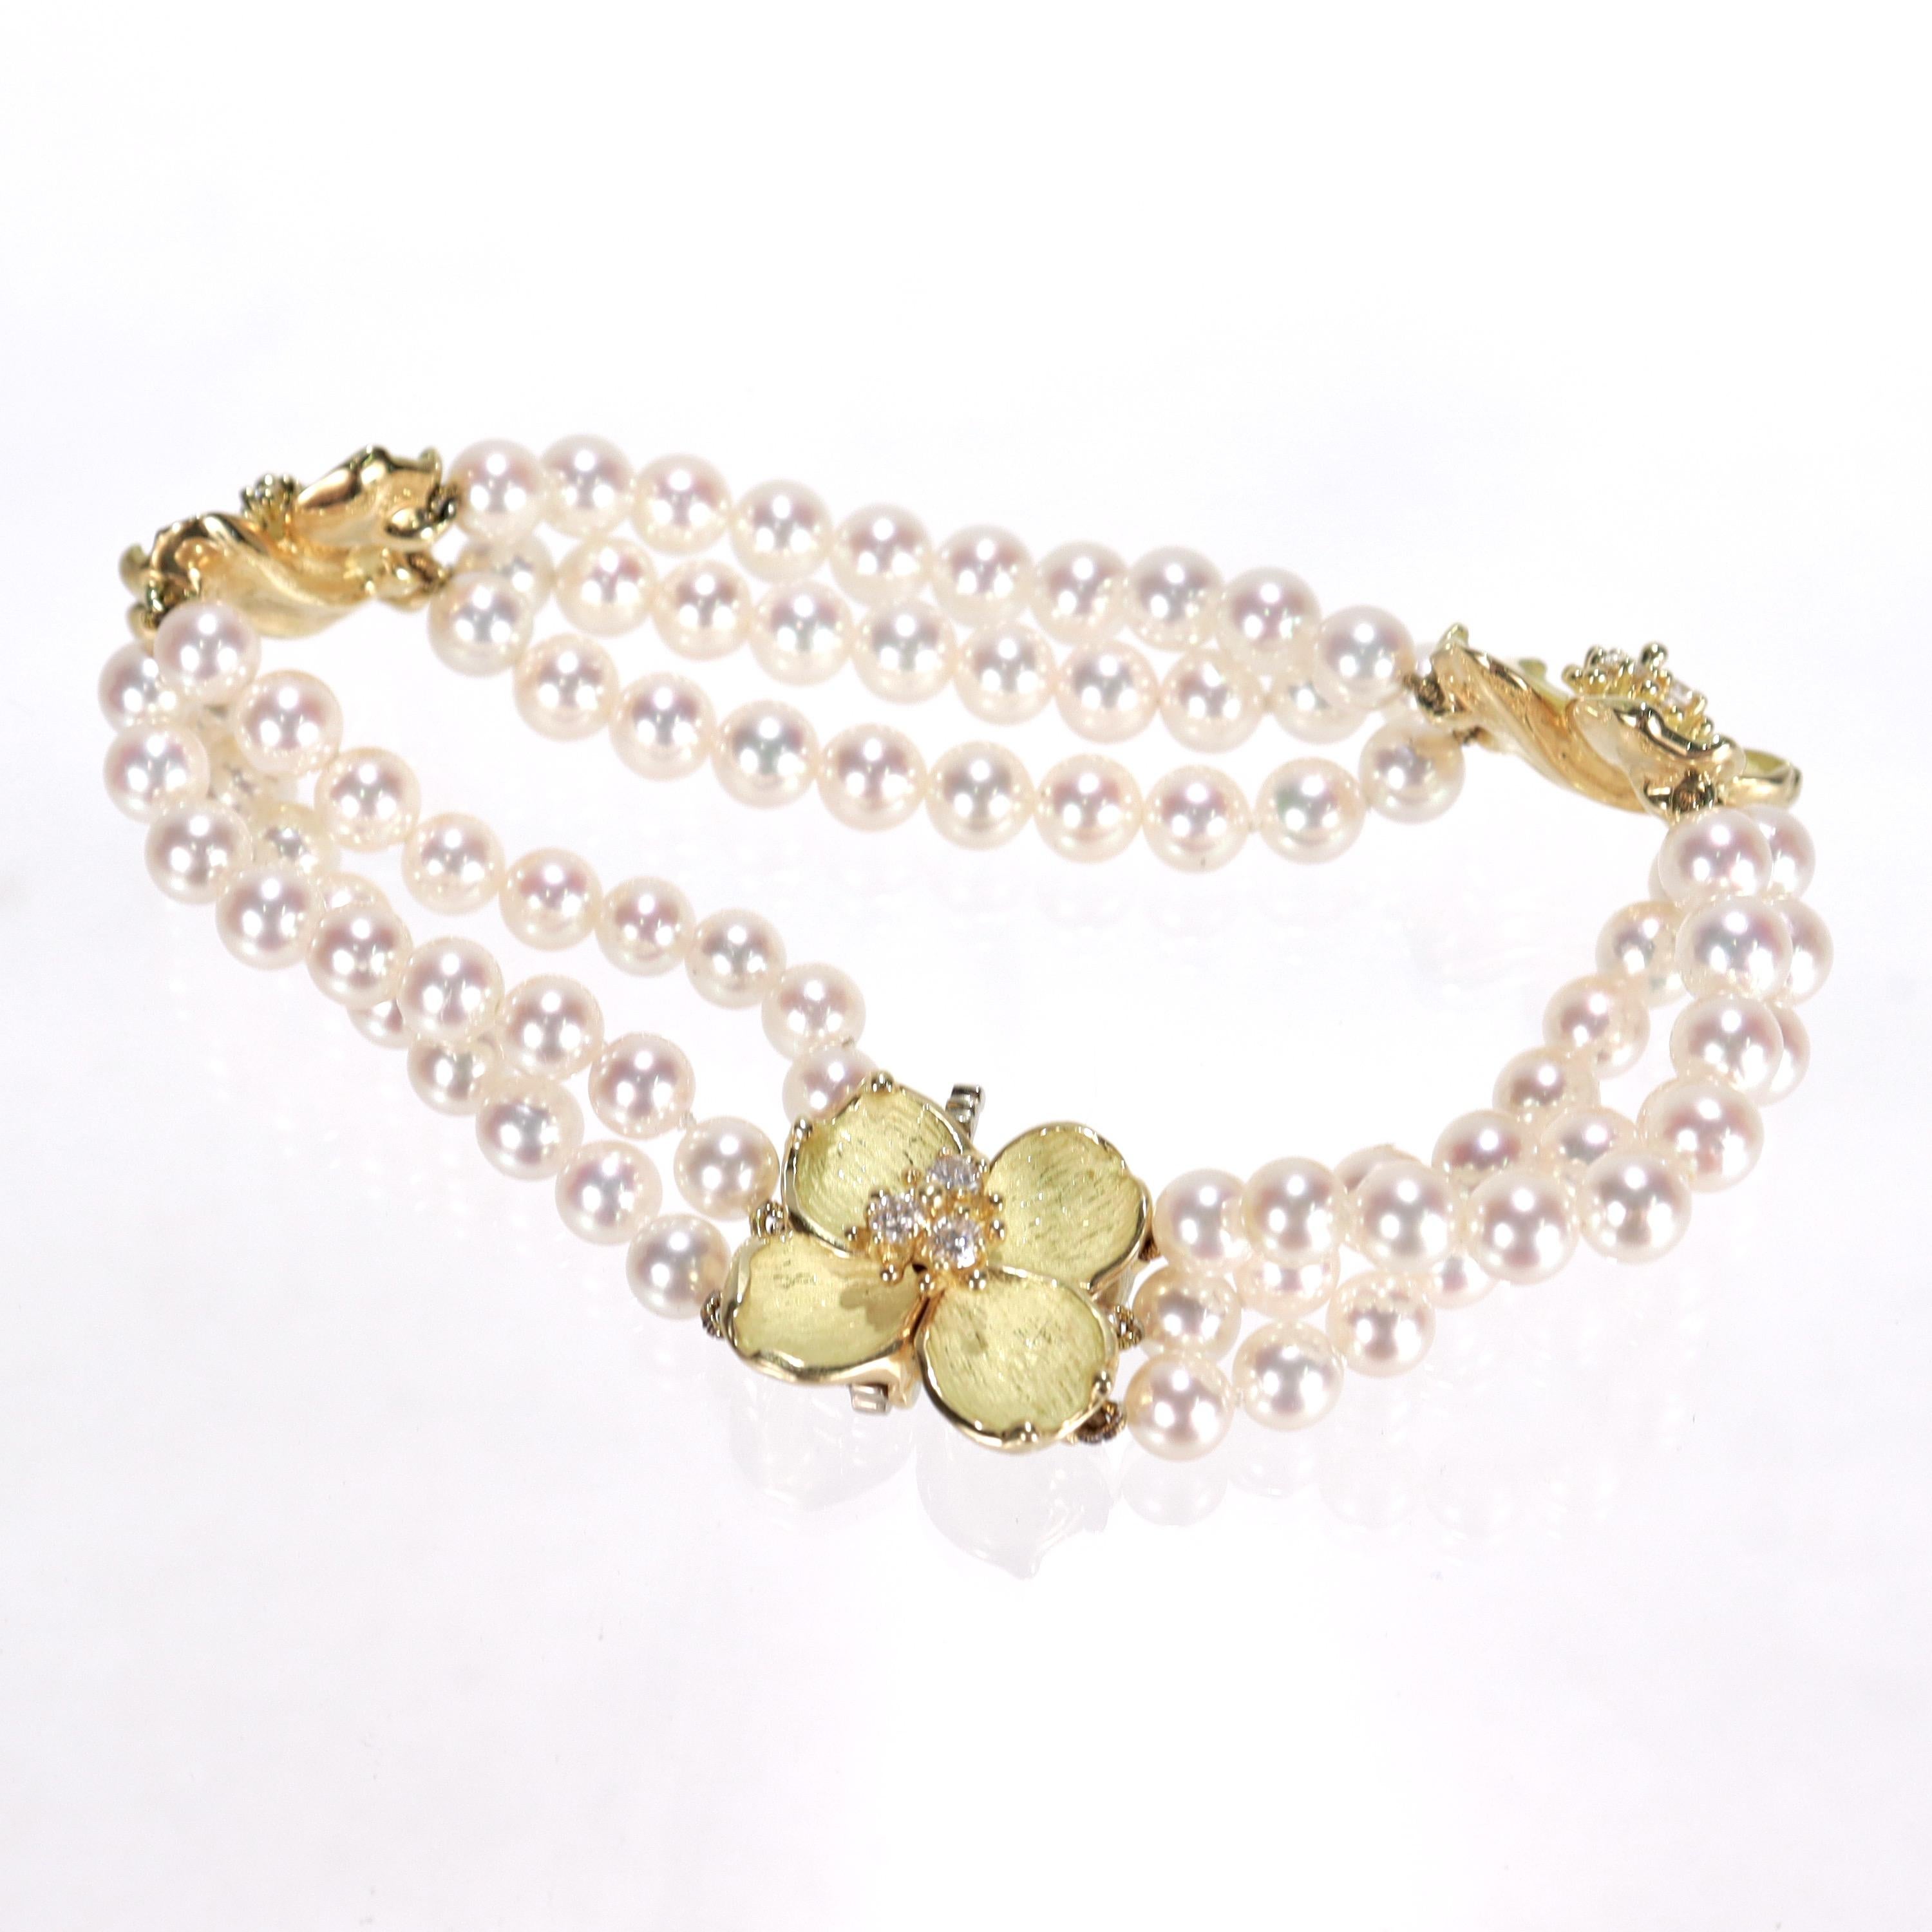 A very fine gold, diamond and pearl 'Dogwood' bracelet. 

By Tiffany & Co. 

In 18k yellow gold.

With three strands of 4.5-5mm cultured pearls, two sculpted gold dogwood blossoms centered on a round cut diamond cluster pistil, and a conforming